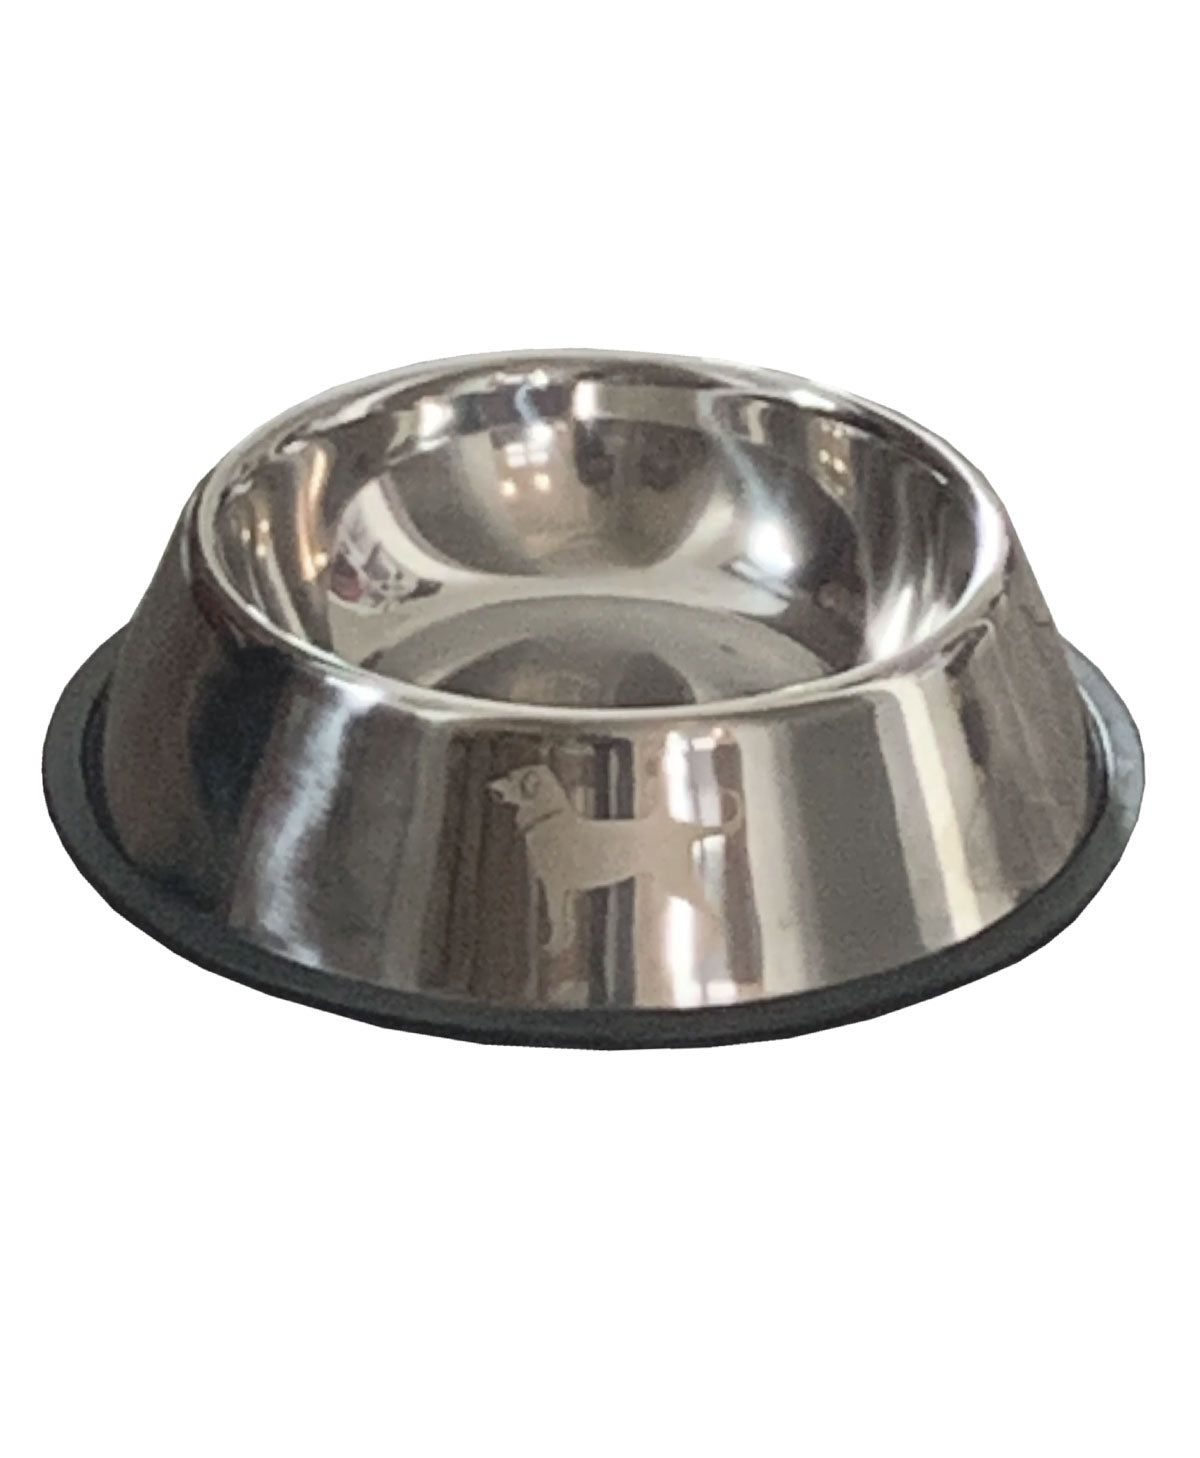 Stainless Steel Etched Dog Bowl